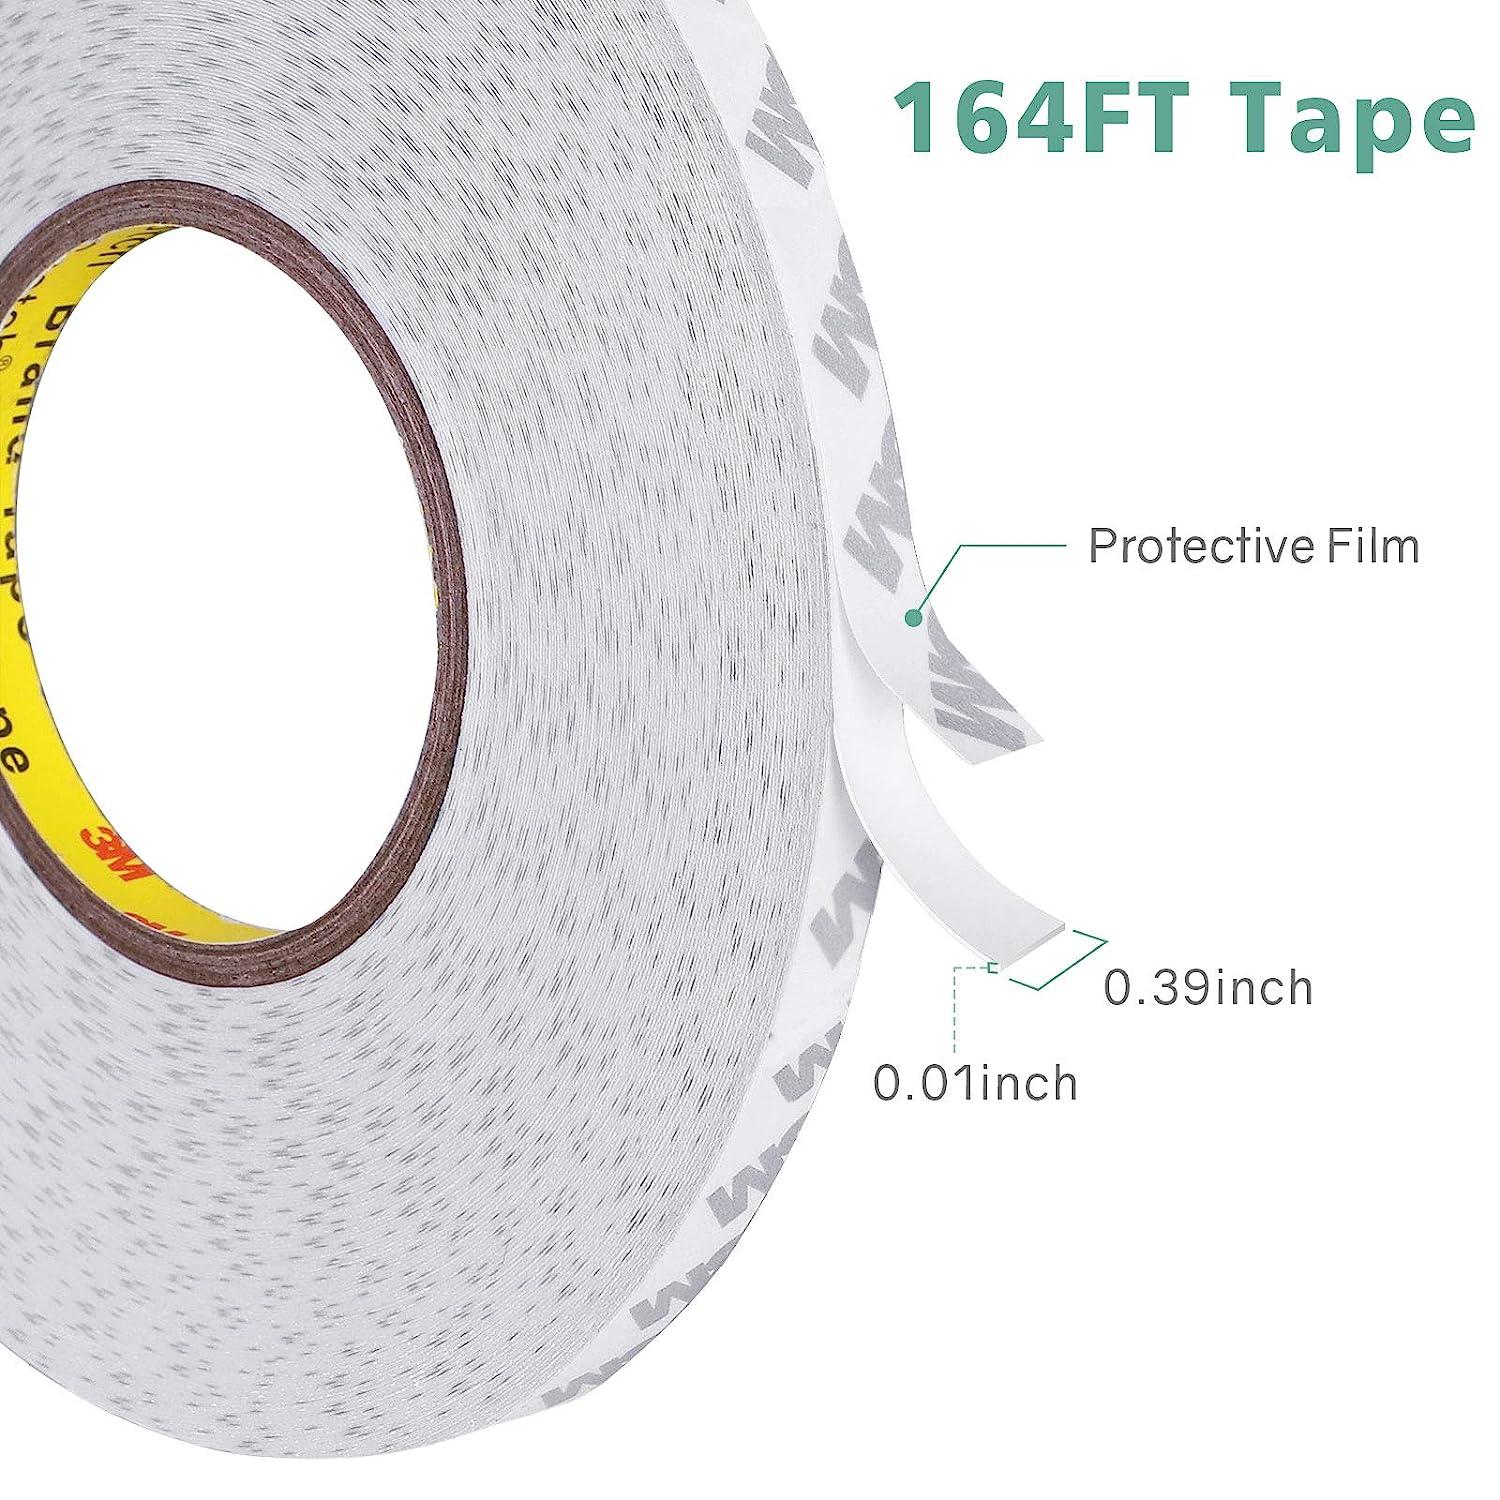 Double Sided Tape Compatible With Any Car, 3M Double Sided Tape